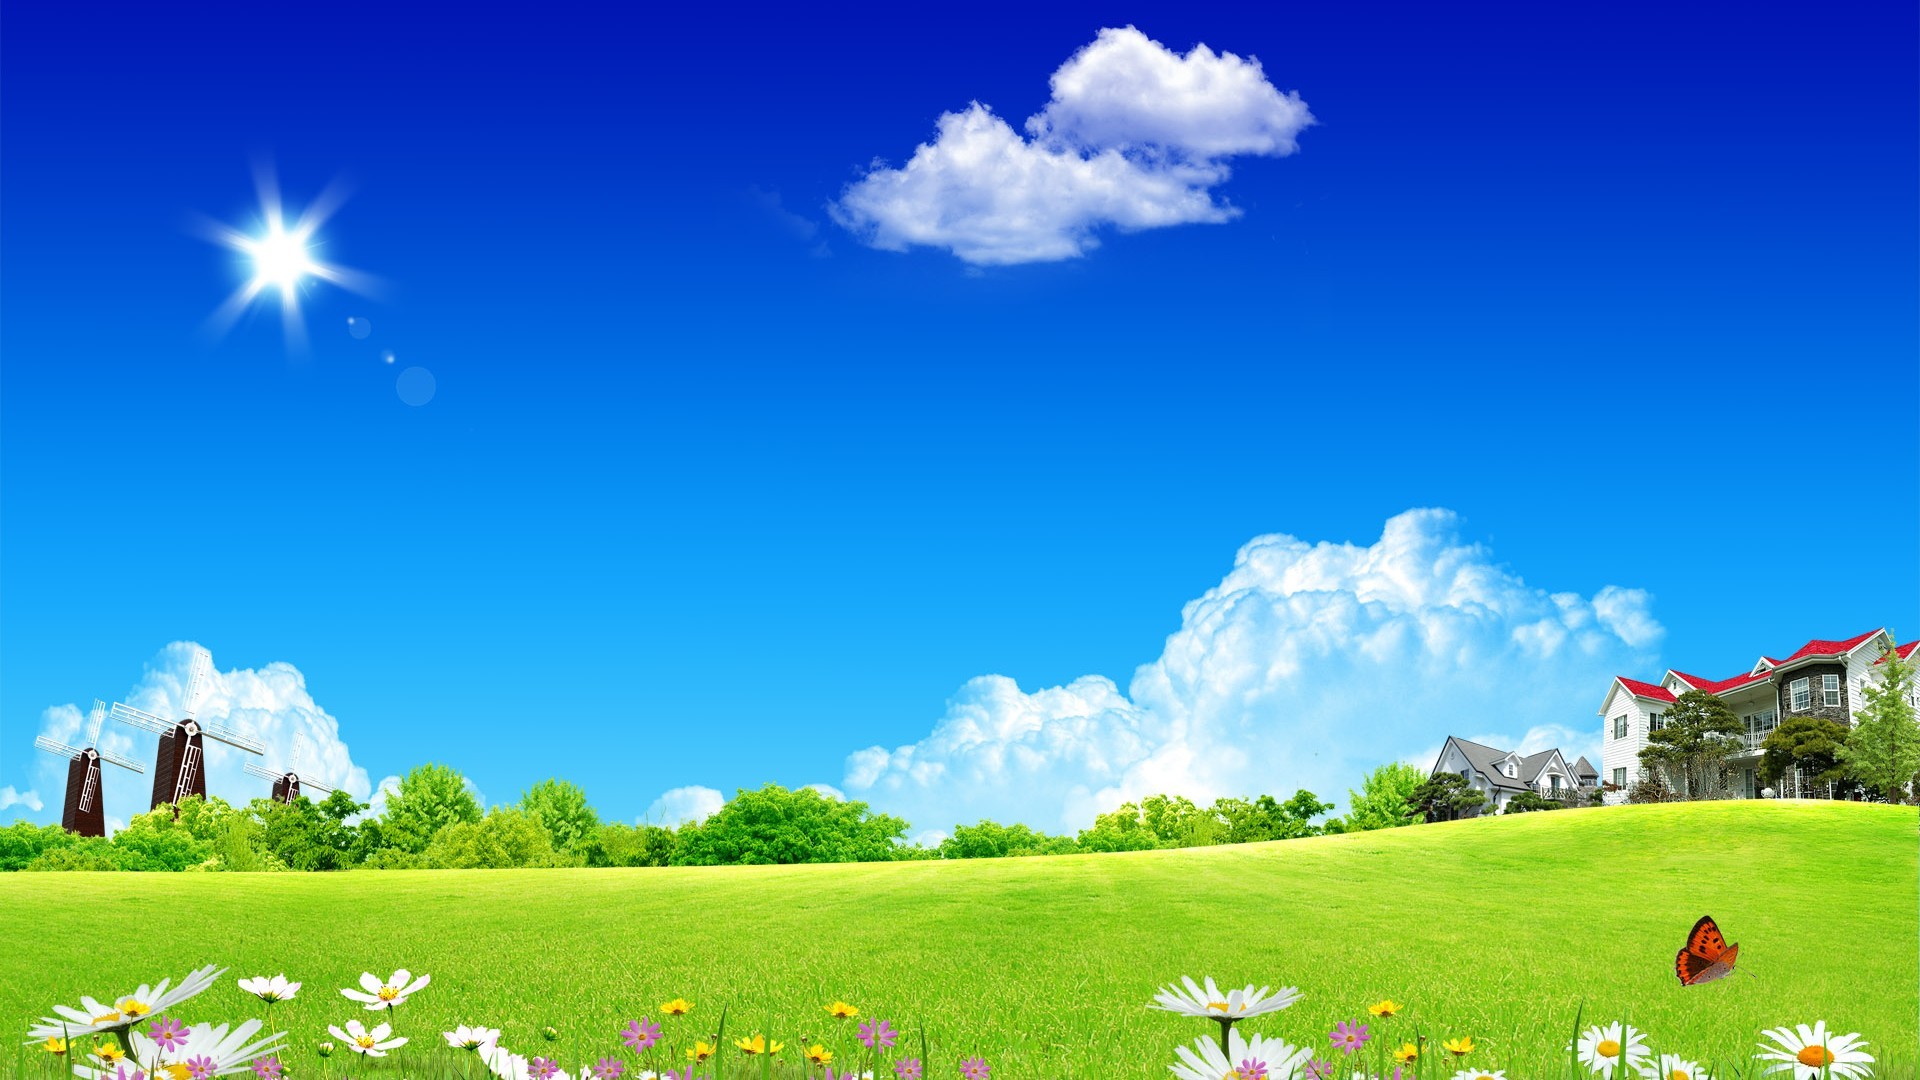 1920x1080 Flower Themes, Flower Backgrounds and Flower Wallpapers